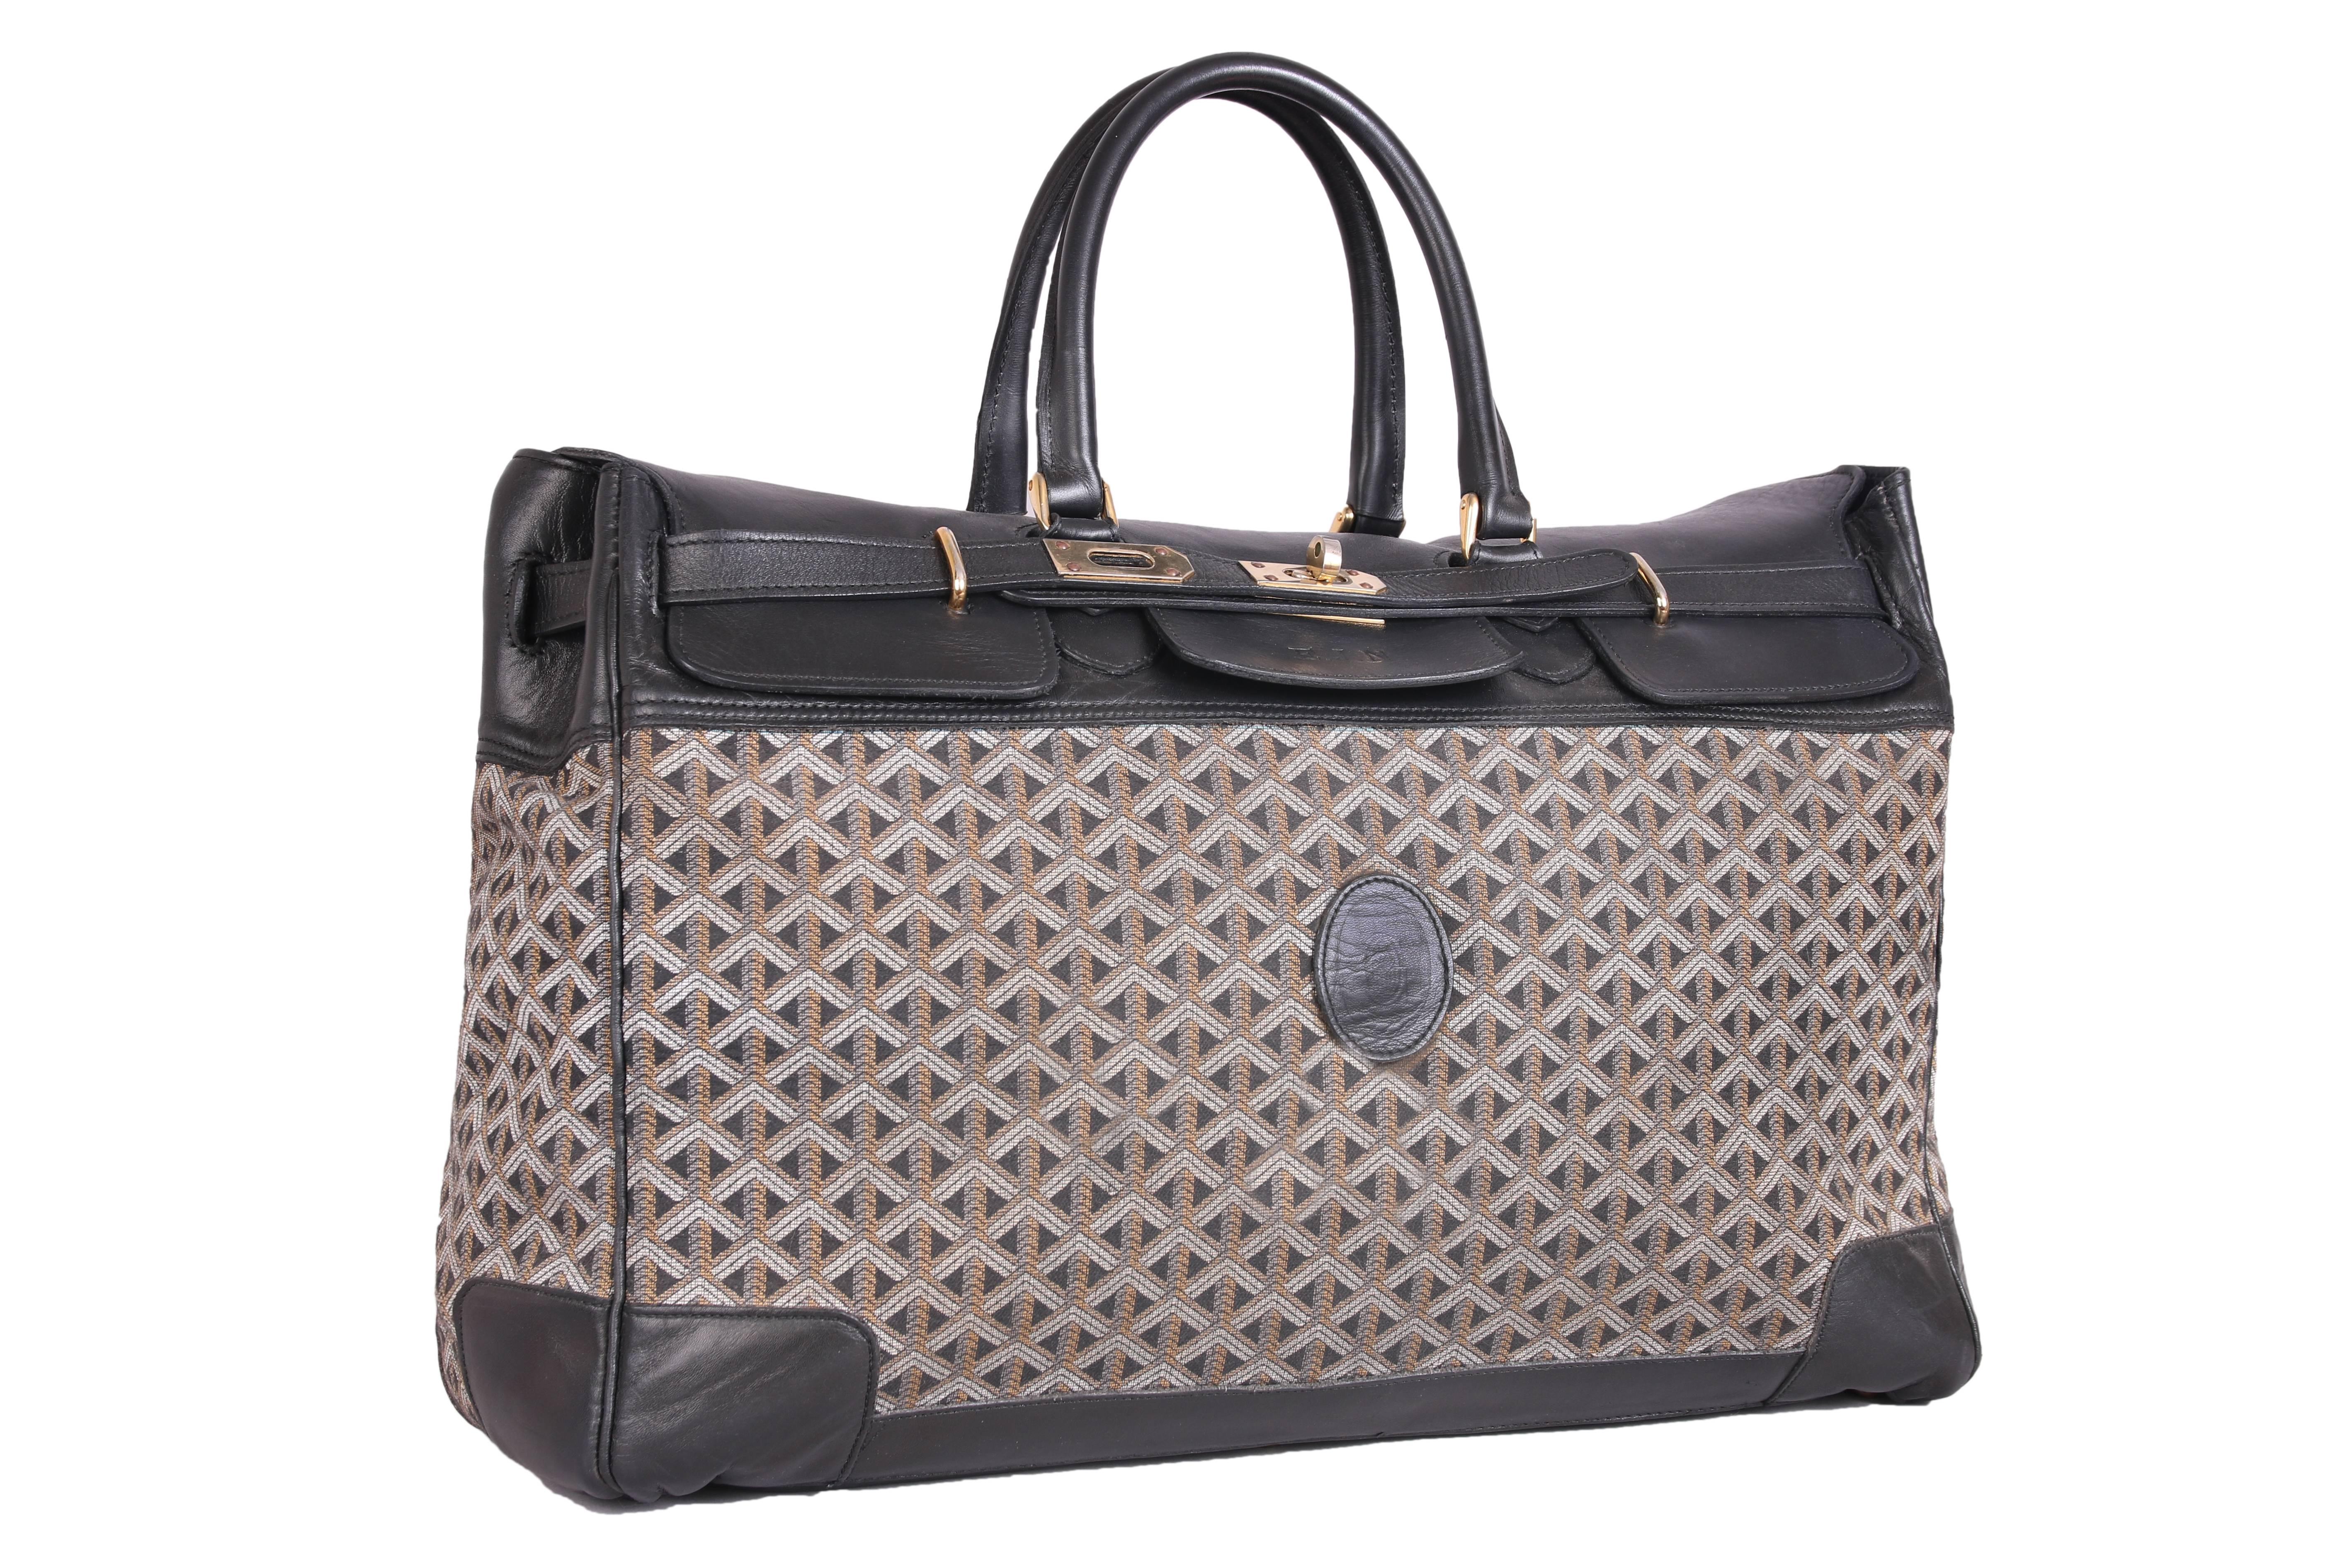 An oversized vintage Goyard travel bag with wraparound straps in the "Birkin" style." Materials are leather, metal and canvas with a creme colored canvas interior. There is an embossed monogram at the front with the initials,